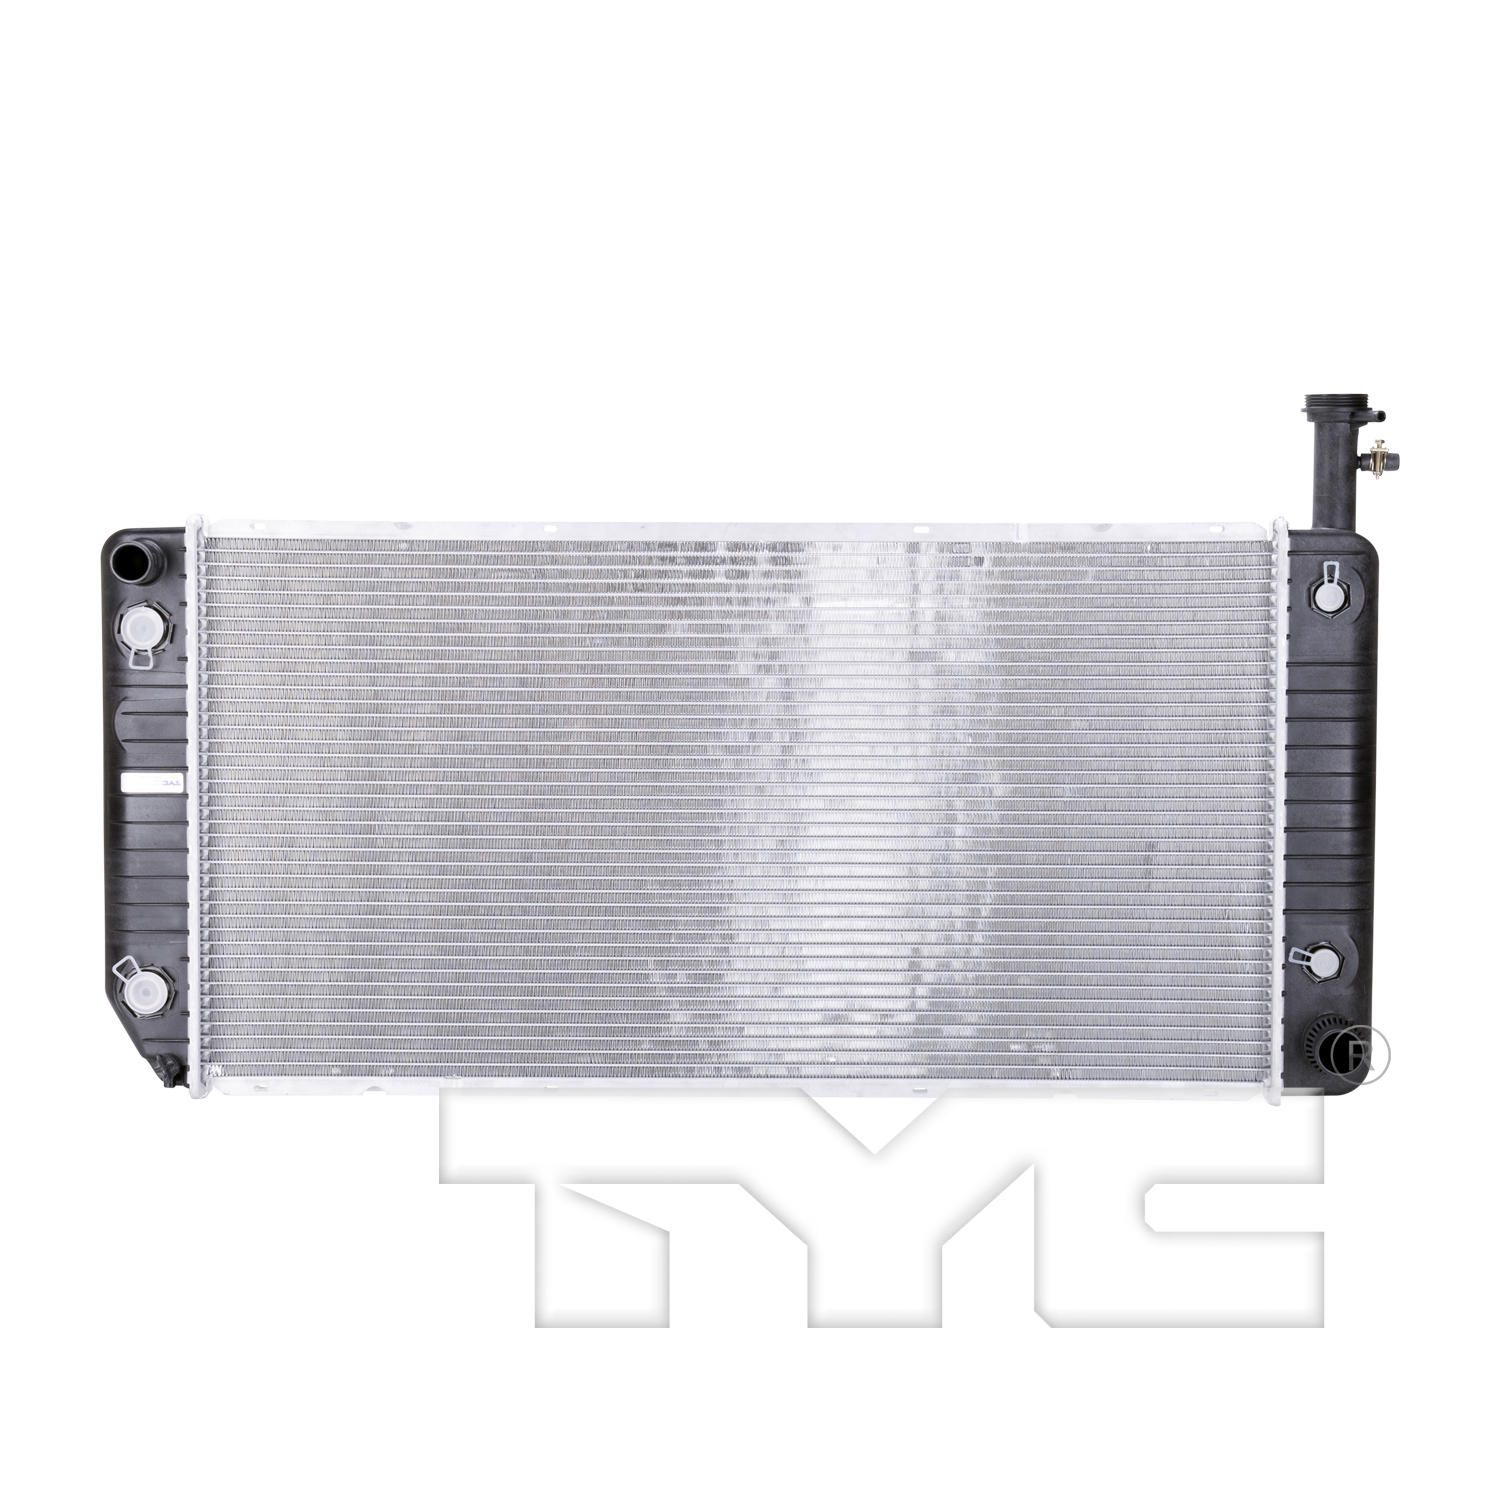 Aftermarket RADIATORS for CHEVROLET - EXPRESS 2500, EXPRESS 2500,05-08,Radiator assembly